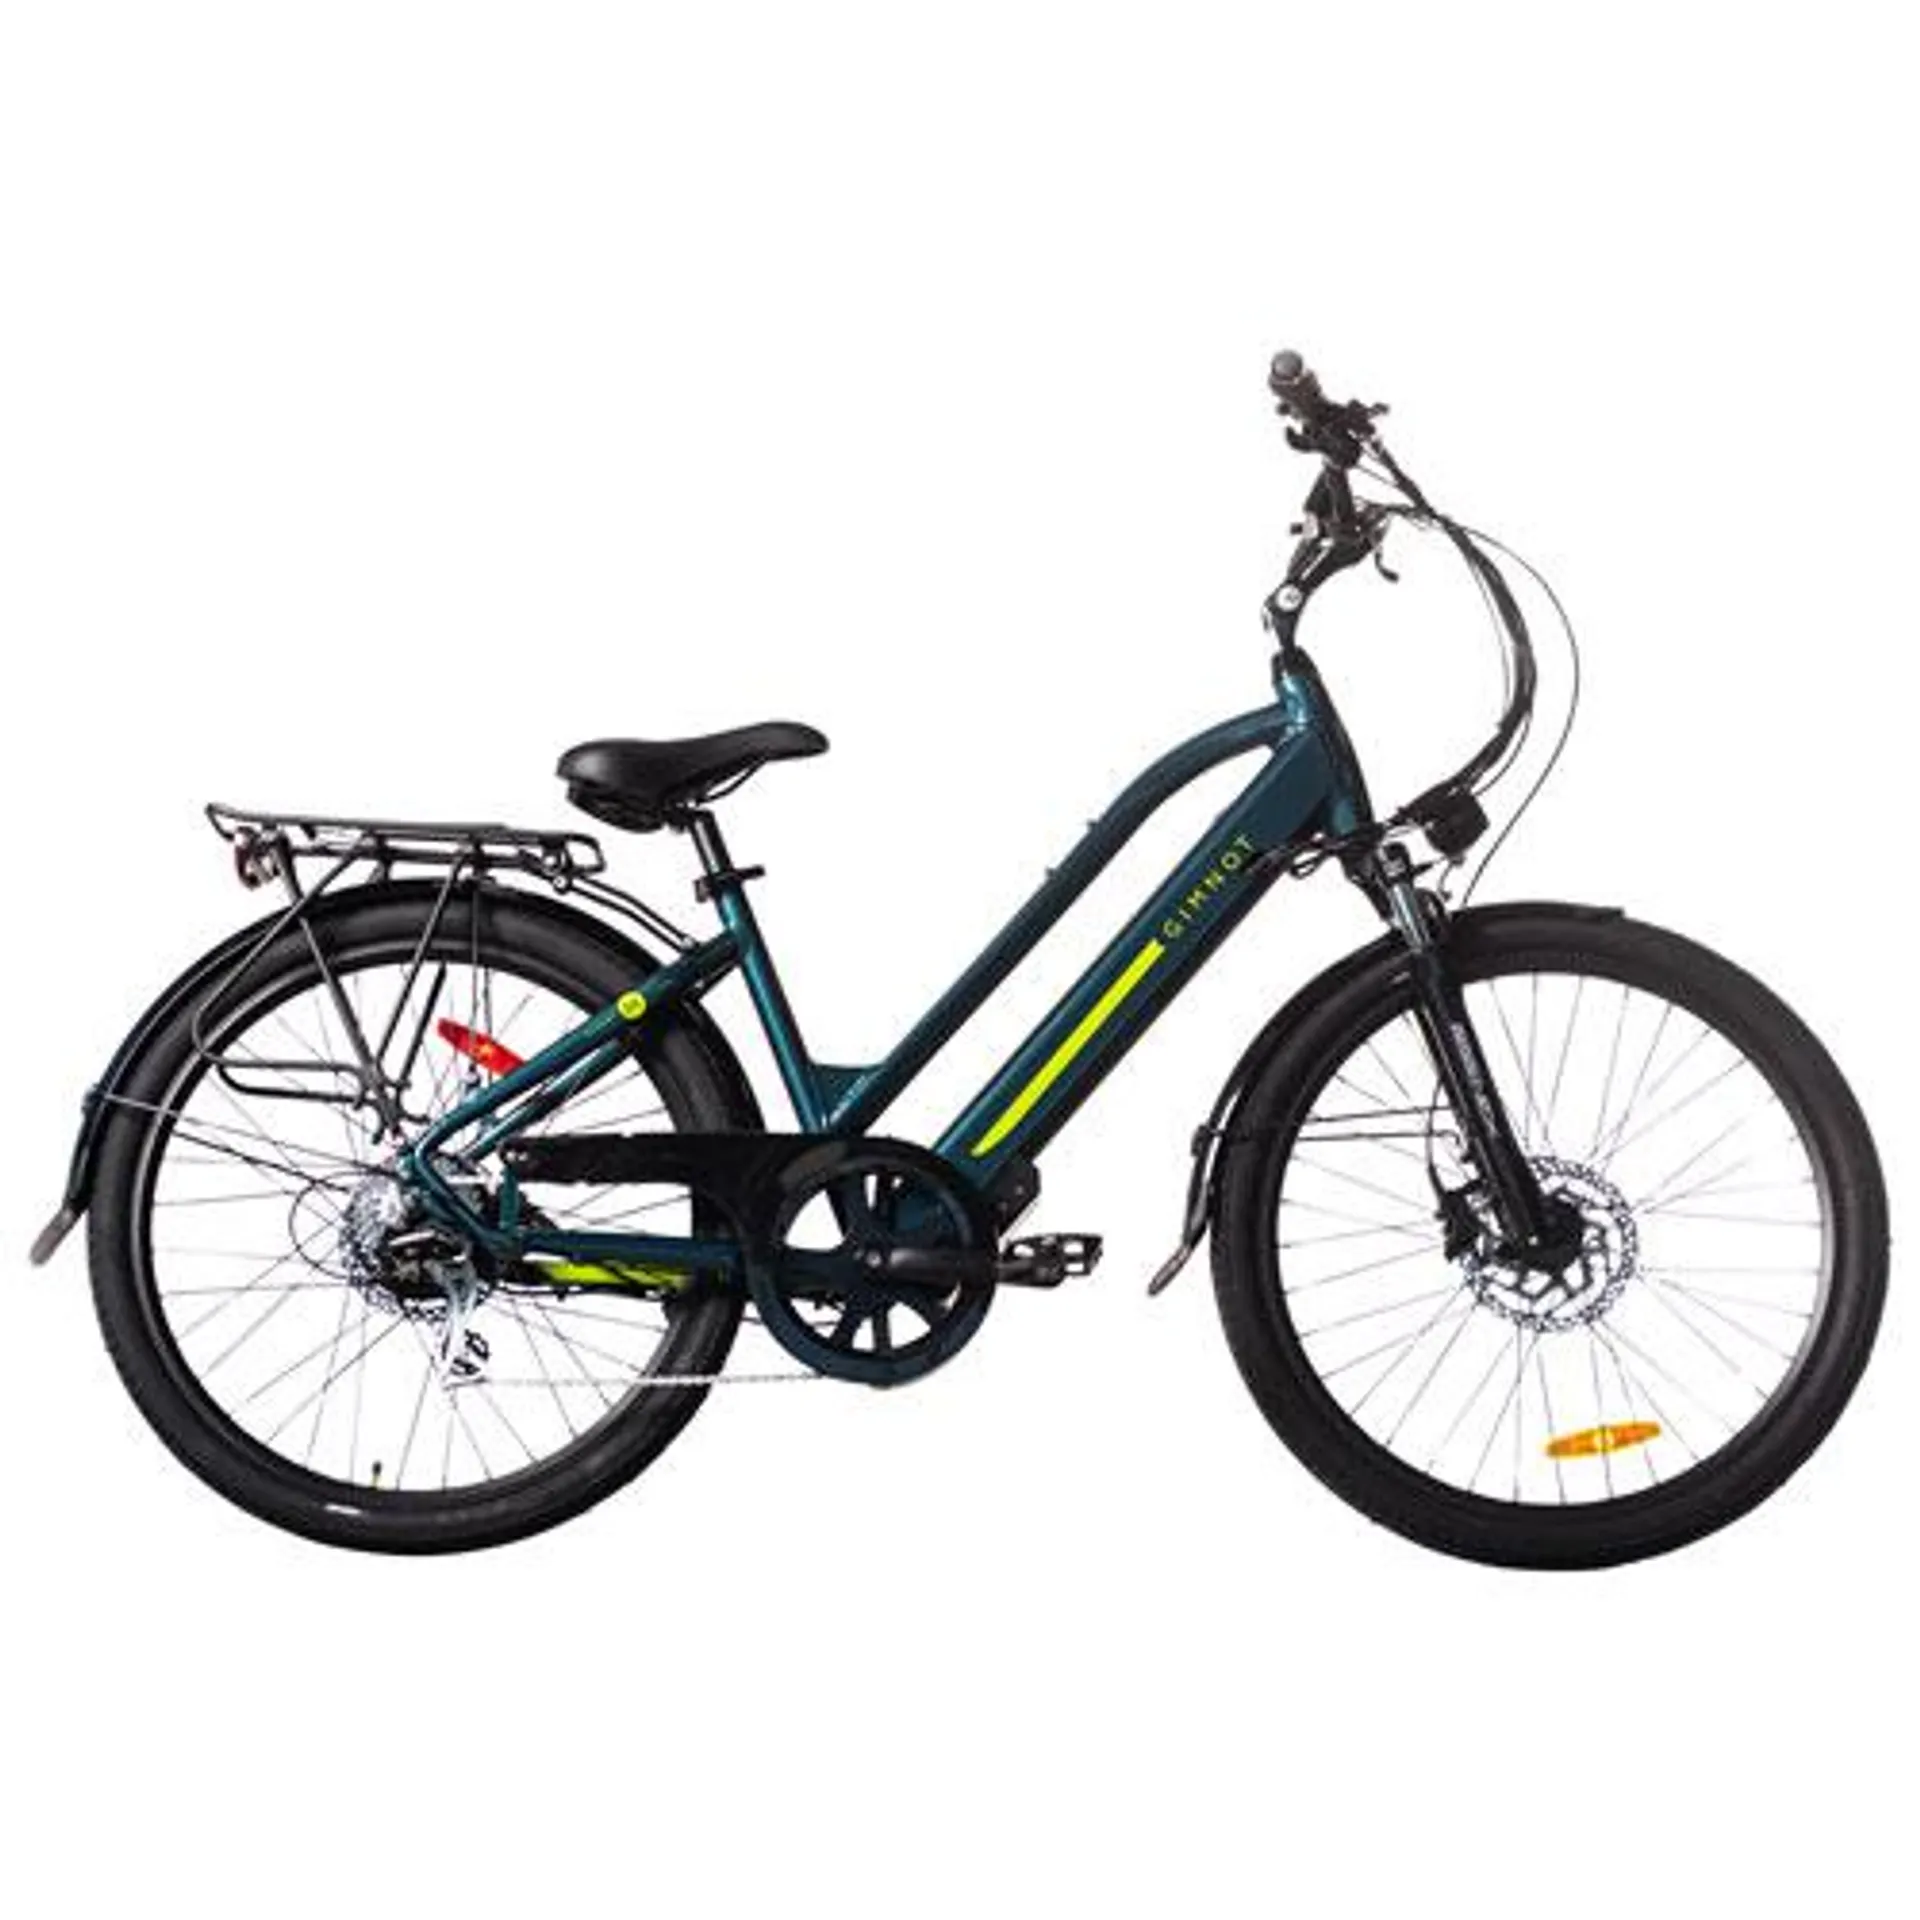 Gimnot D1 Medium 500W Step-Through Electric City Bike with up to 90km Battery Life - Amp Teal - Only at Best Buy